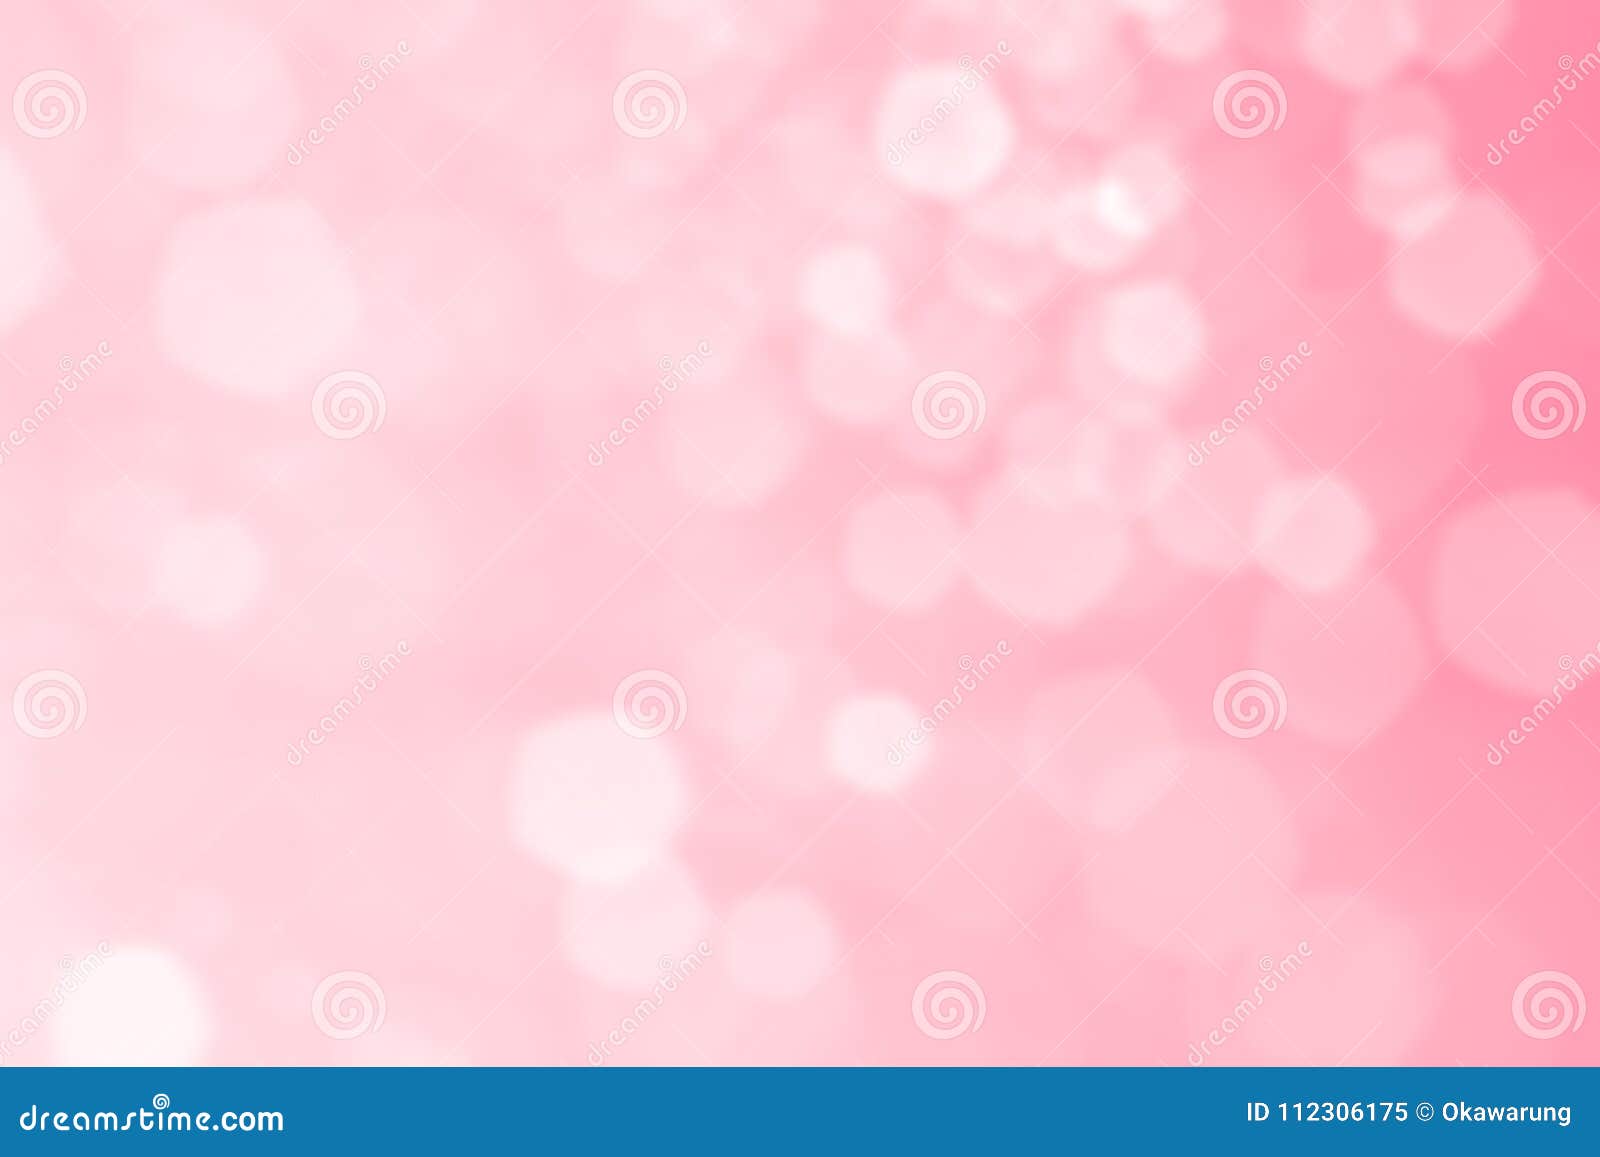 Abstract Pink Colour Background Stock Image - Image of color, bright:  112306175